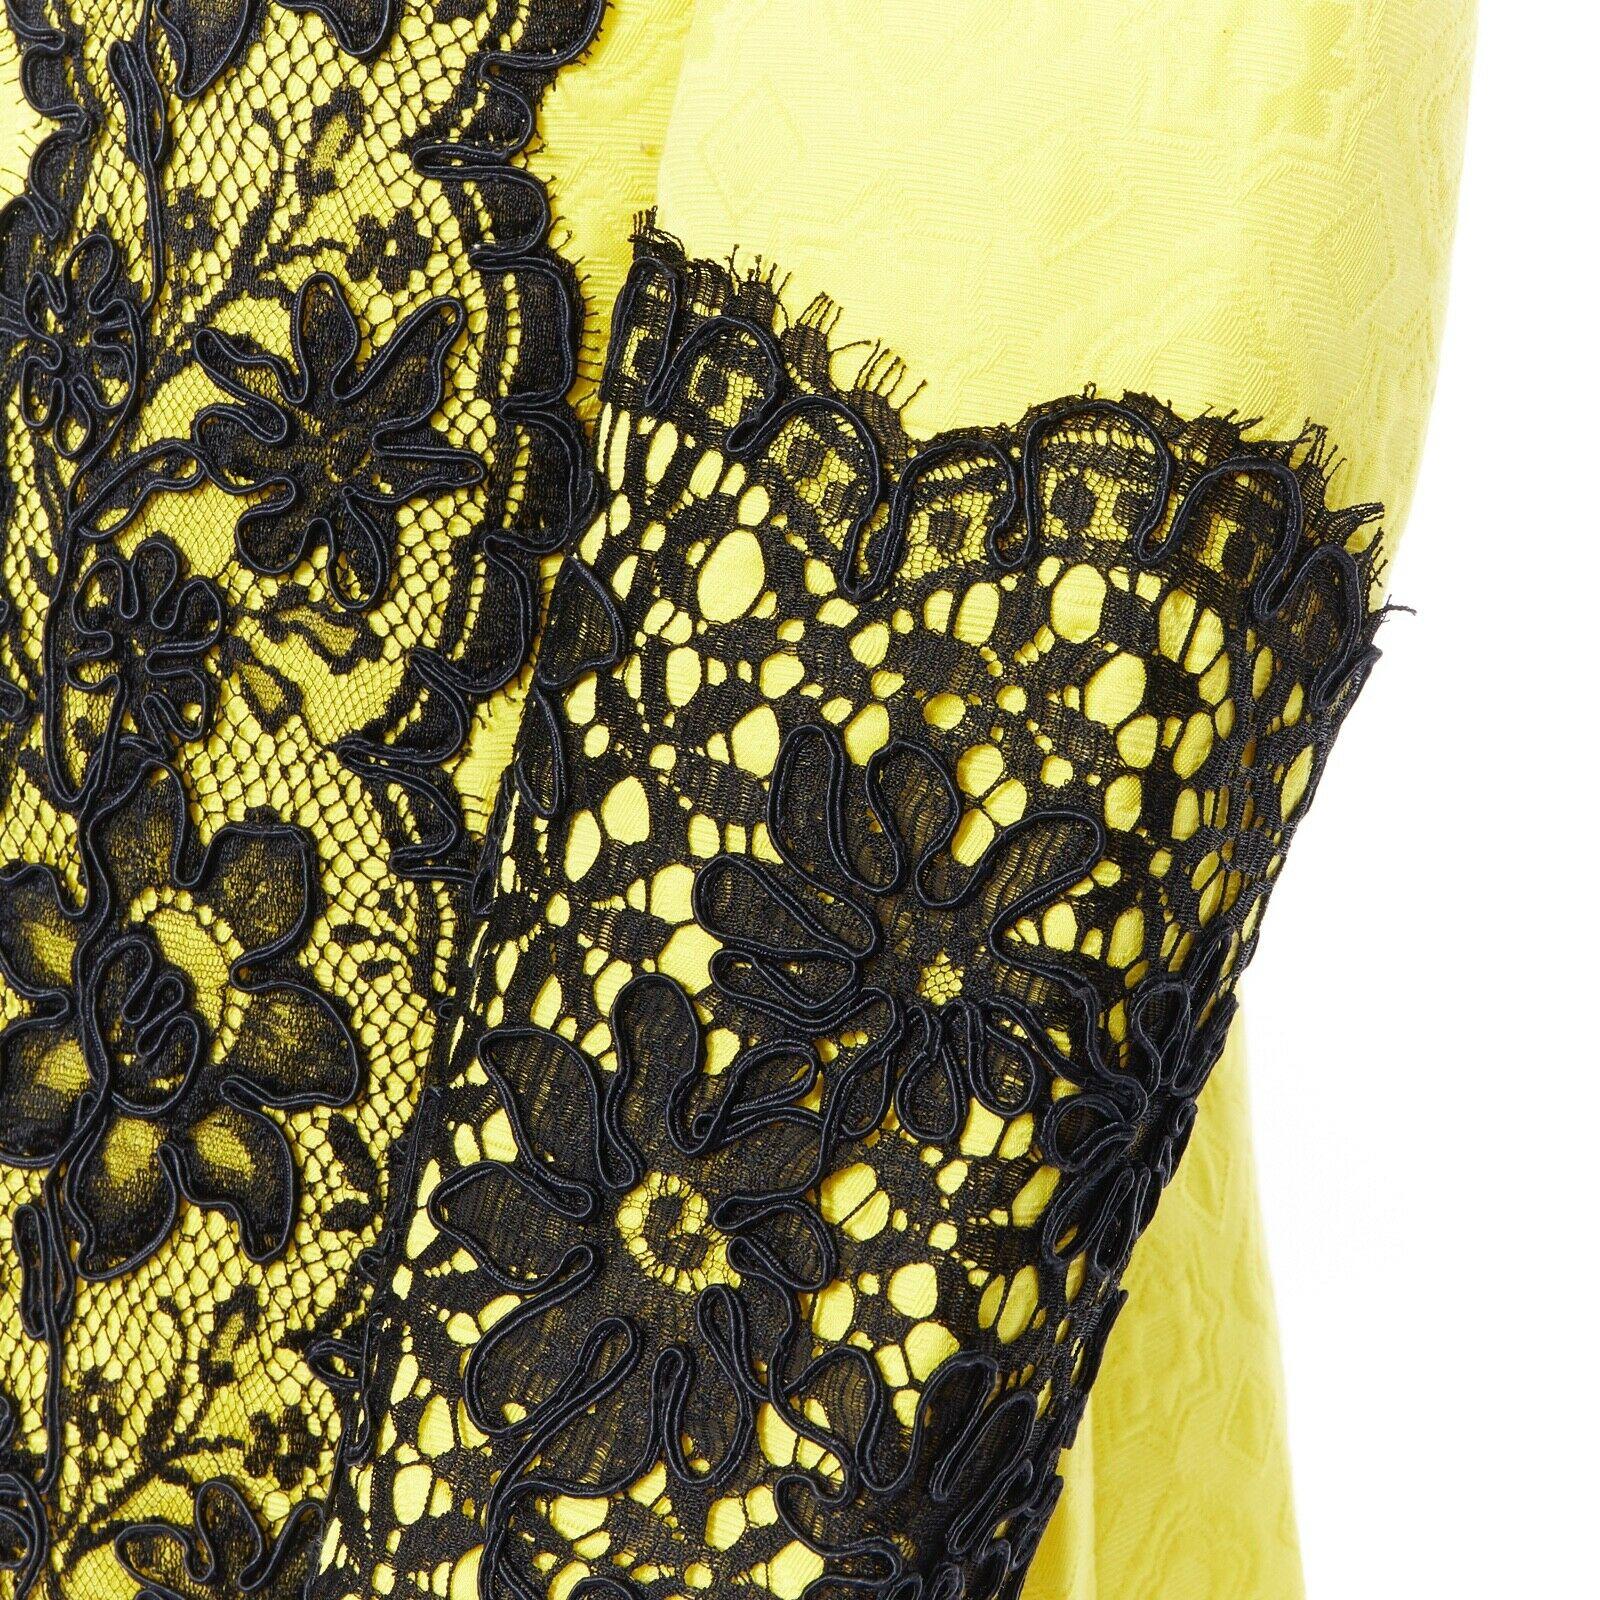 CHRISTIAN LACROIX yellow cotton floral jacquard black lace padded jacket FR40
Brand: Christian Lacroix
Designer: Christian Lacroix
Model Name / Style: Lace jacket
Material: Cotton and lace
Color: Yellow and black
Pattern: Floral lace
Closure: